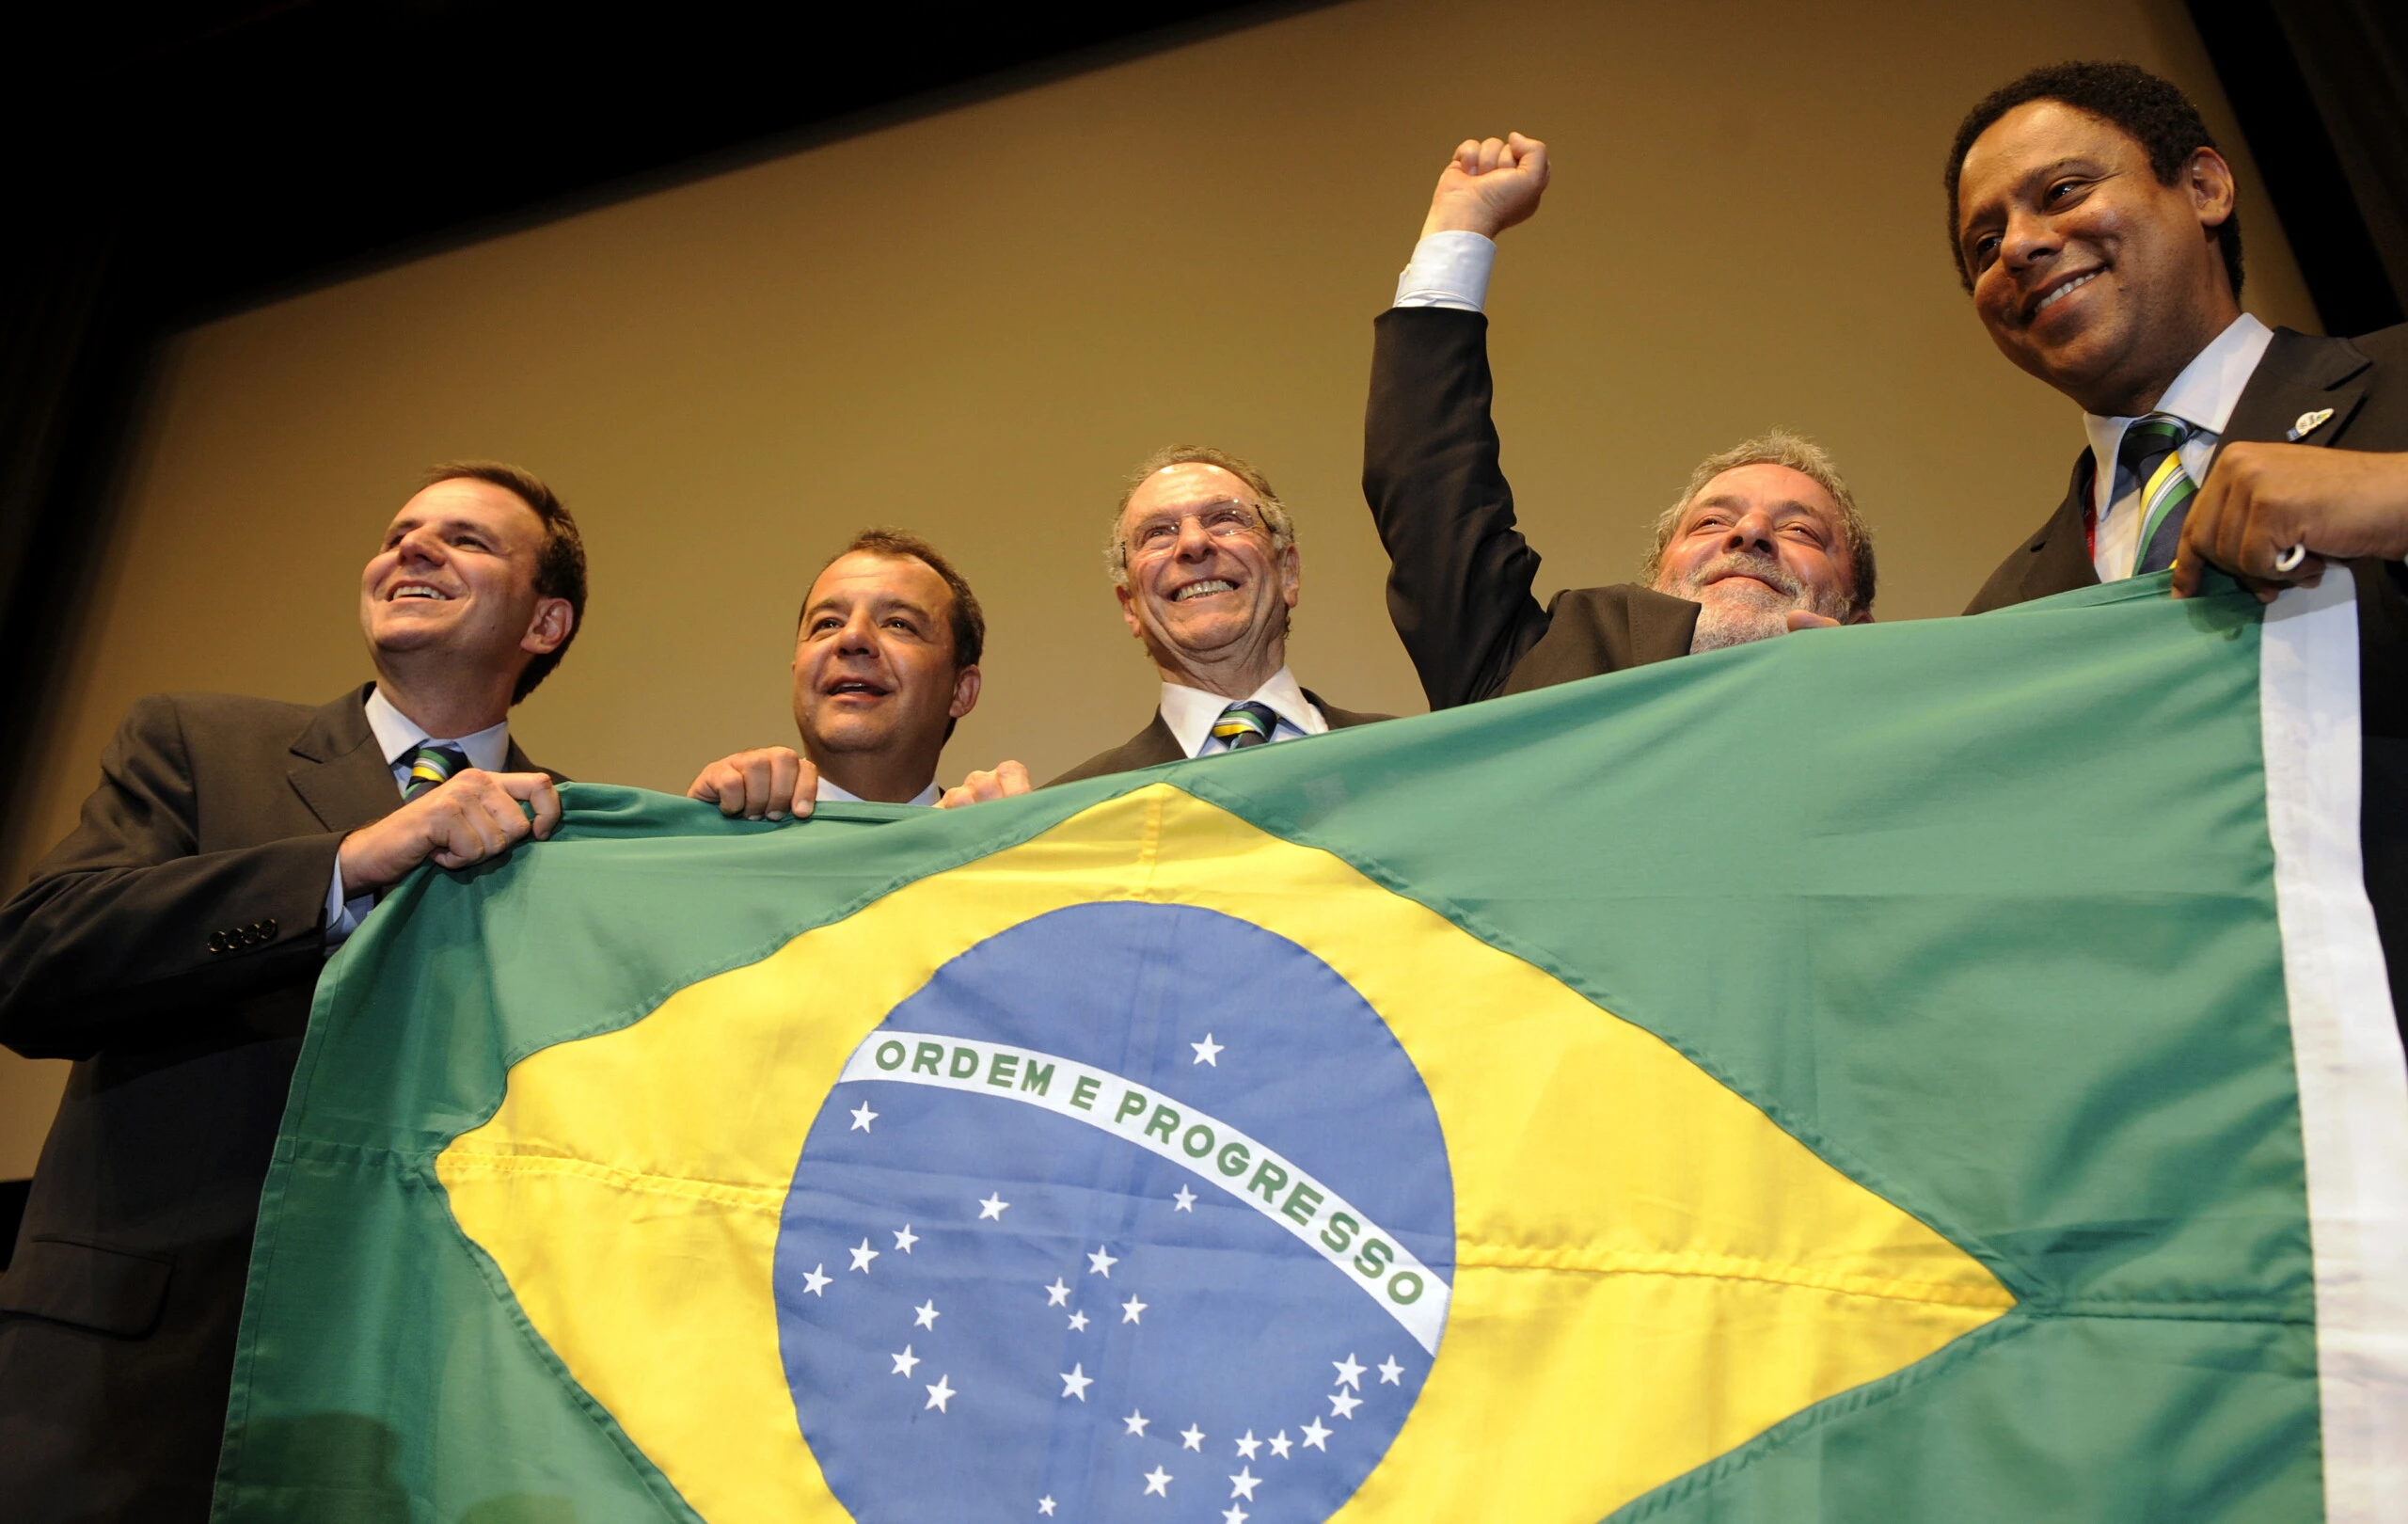 (L-R) Mayor of the city of Rio de Janeiro Eduardo Paes, Governor of the State of Rio de Janeiro Sergio Cabral, President of Rio 2016 Bid Committee Carlos Arthur Nuzman, Brazilian President Luiz Inacio Lula da Silva  and Brazilian Minister of sport Orlando Silva rejoice at the press conference after Rio won the right to host the 2016 Olympic games, on October 2, 2009 in Copenhagen. The International Olympic Committee (IOC) voted in Rio as the 2016 Summer Olympic city today after a final round battle in Copenhagen.  AFP PHOTO / FRANCK FIFE  (Photo credit should read FRANCK FIFE/AFP/Getty Images)